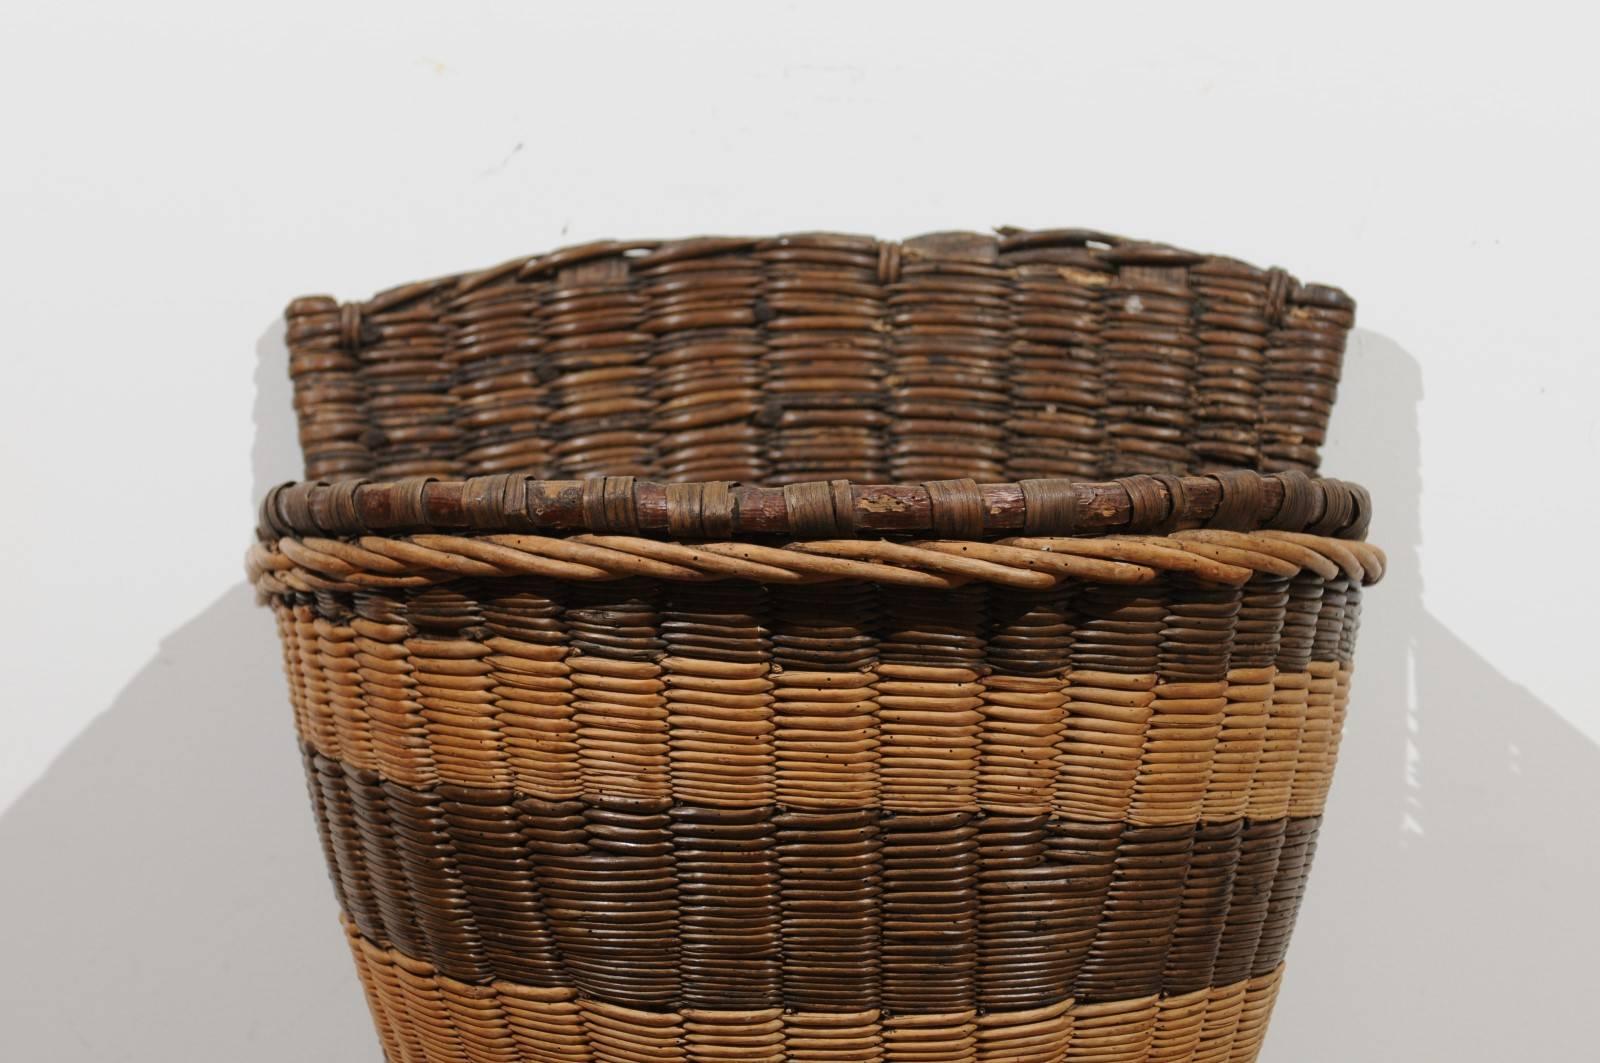 Rustic French 19th Century Small Two-Toned Wicker Grape Harvesting Basket from Burgundy